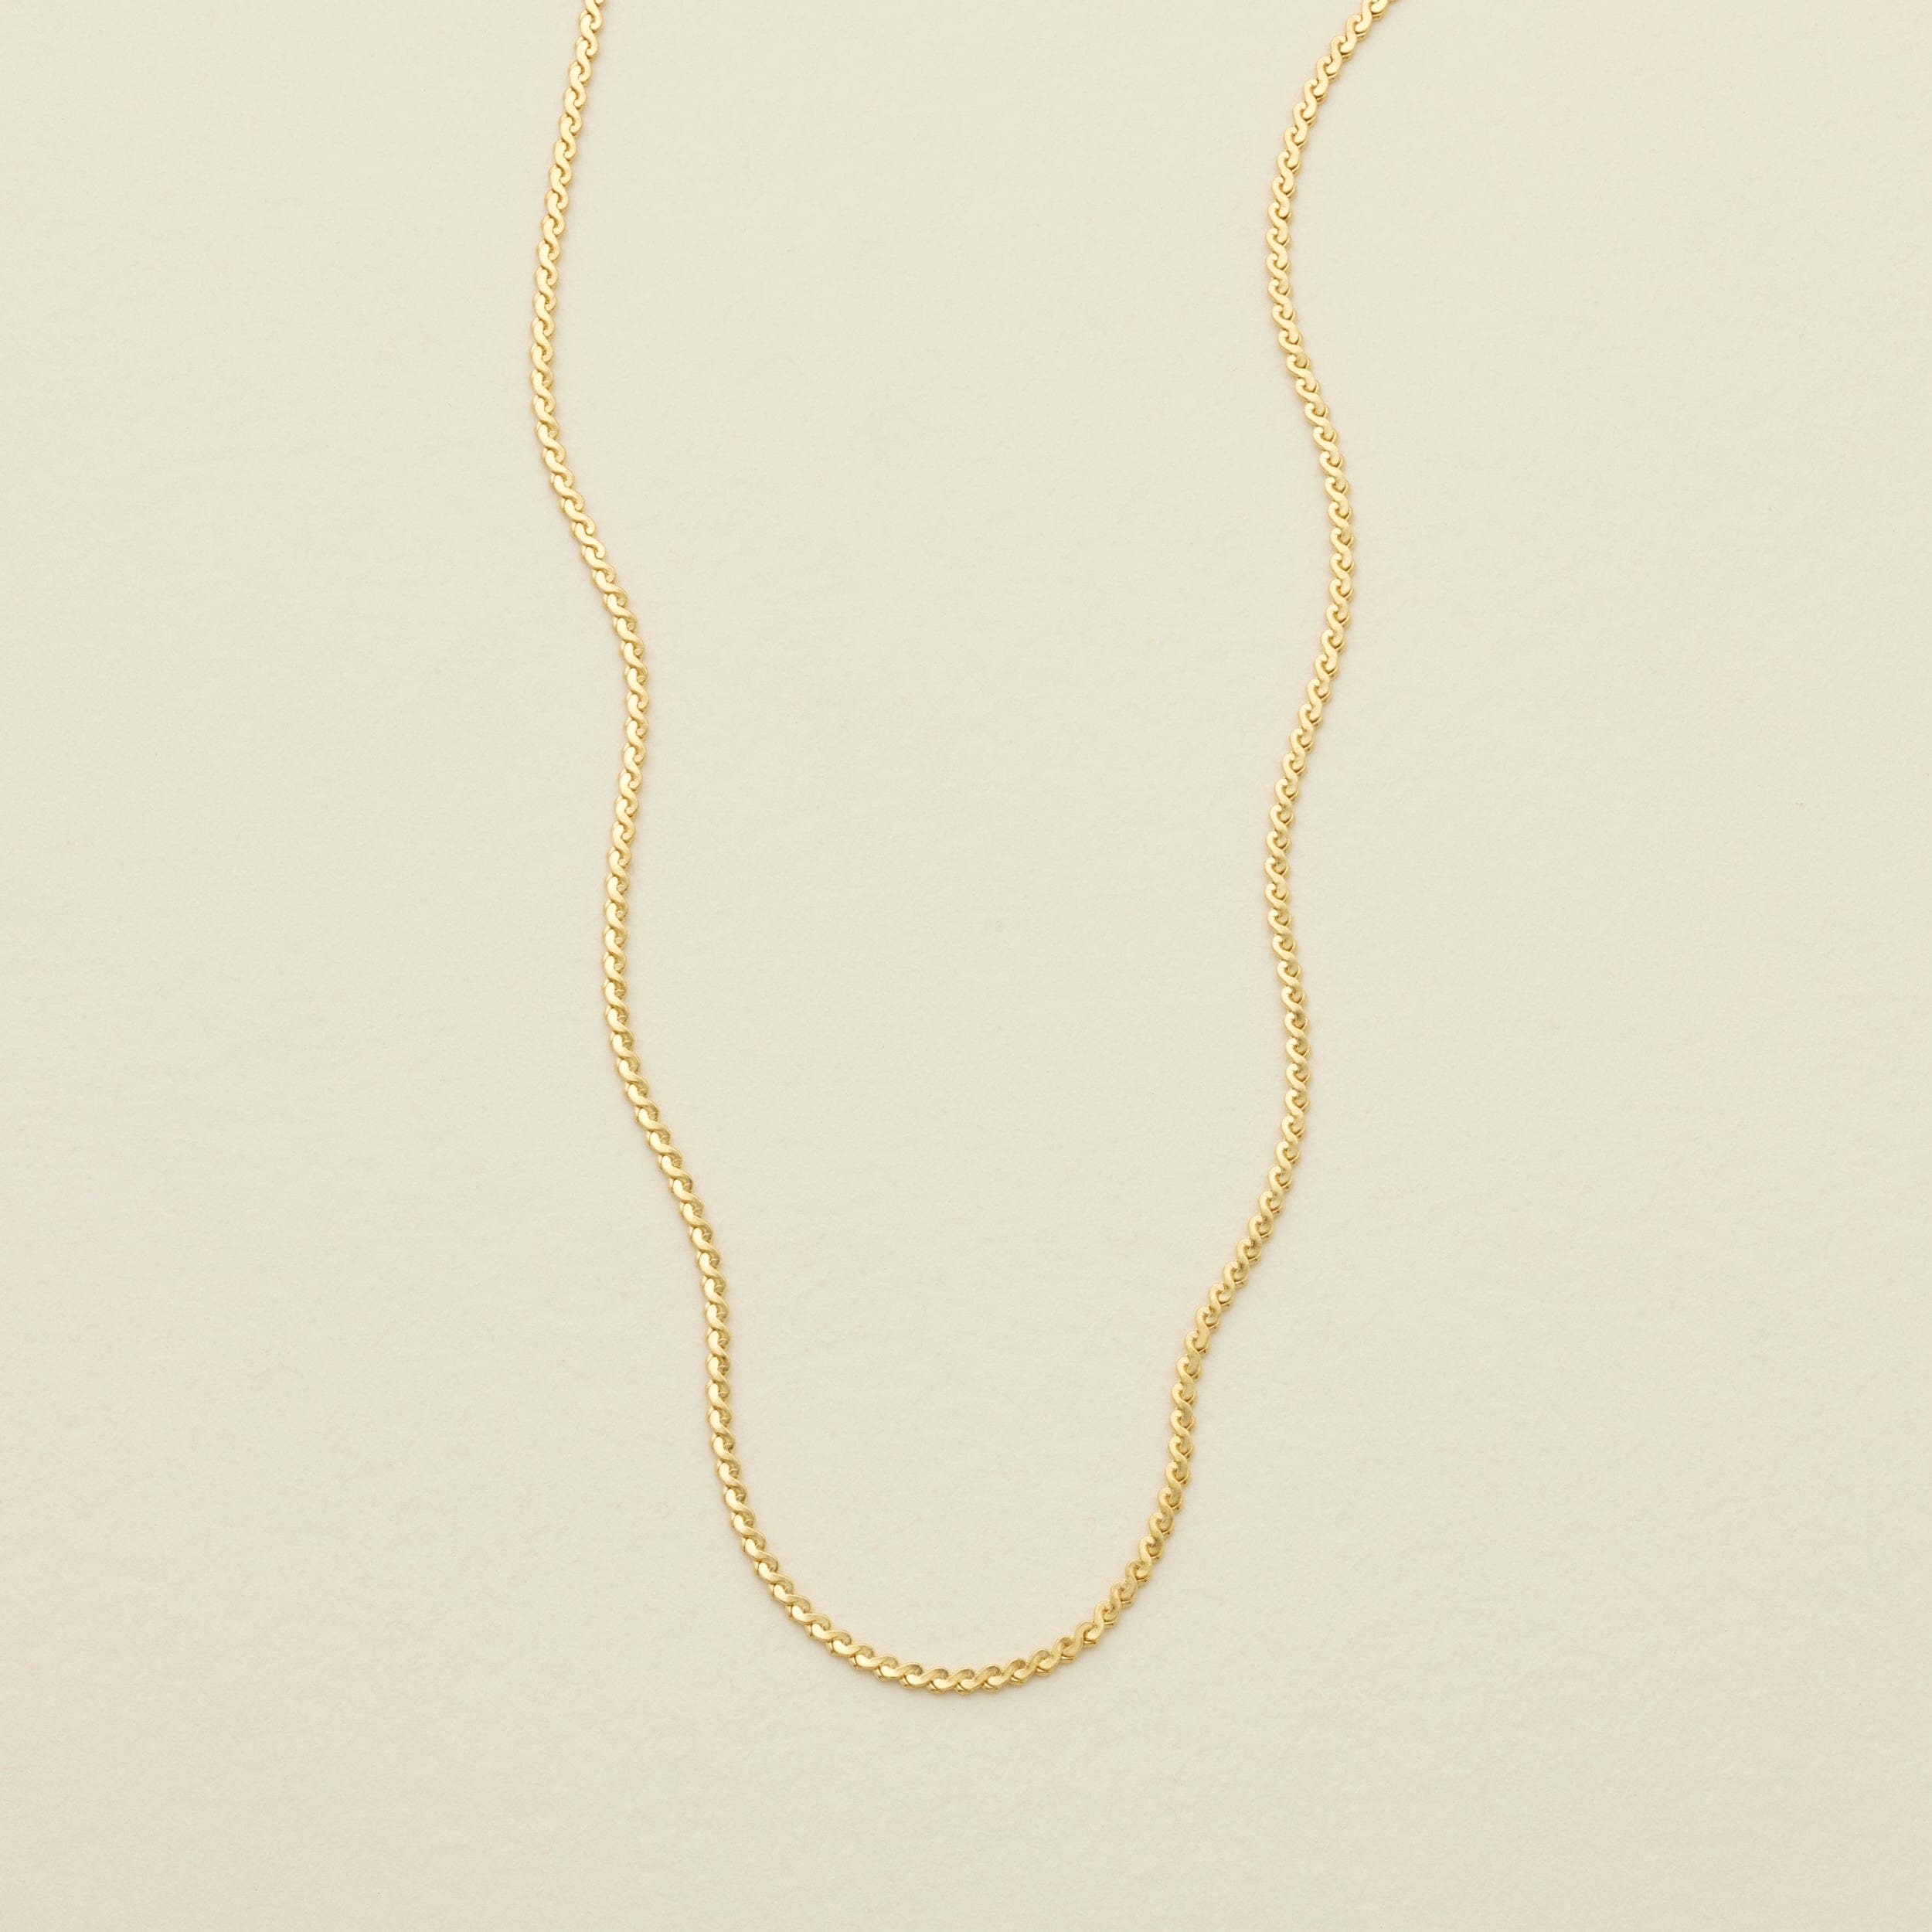 Serpentine Chain Necklace Gold Filled Necklace